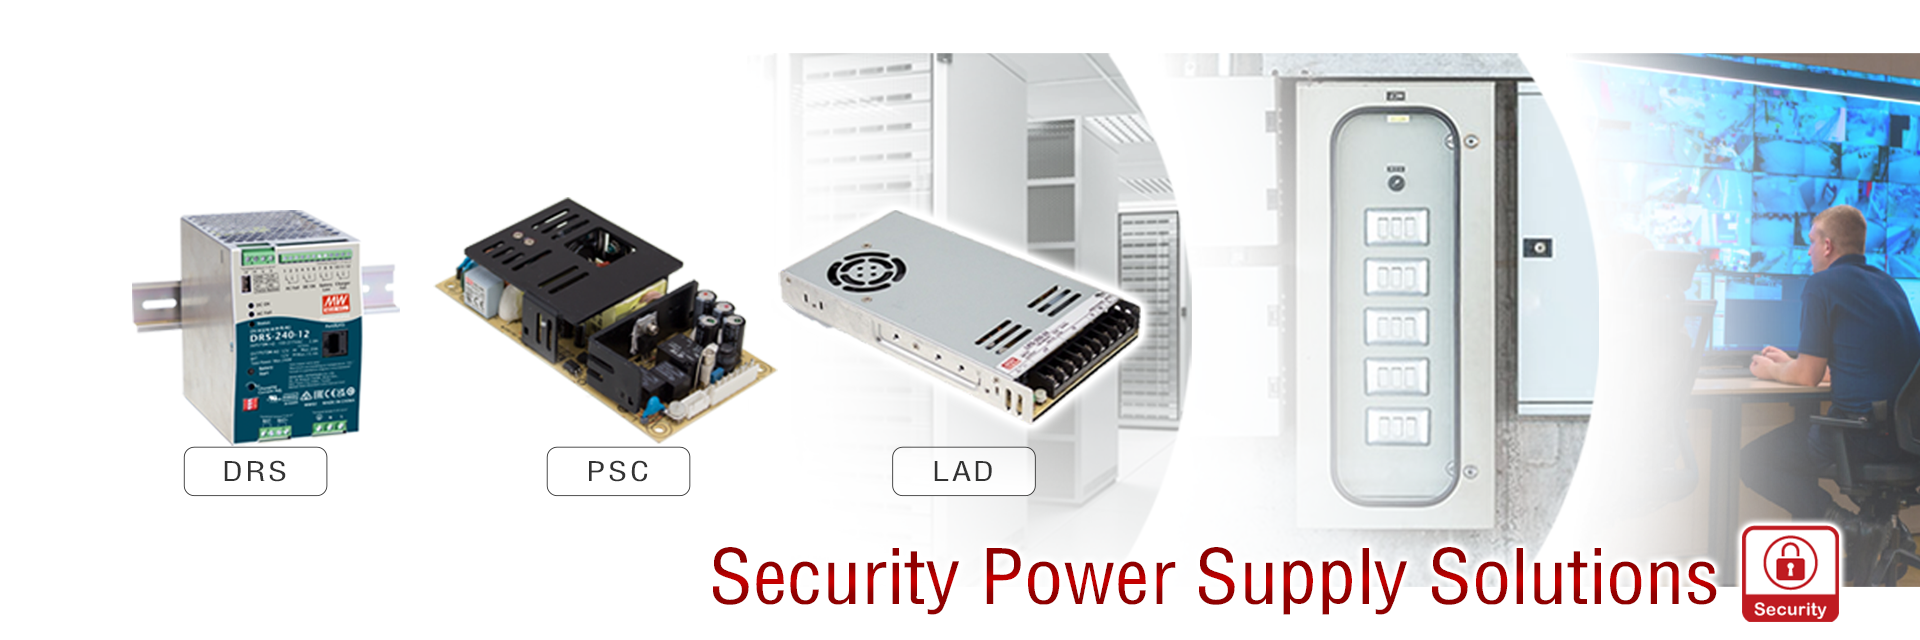 MEAN WELL's security power supplies offer three installation types: Open frame, Enclosed type and DIN RAIL type for different application environments. It can be widely used in security control systems, fire protection facilities, emergency lighting systems, alarm systems, database center uninterruptible power systems, central monitoring systems and access control systems.